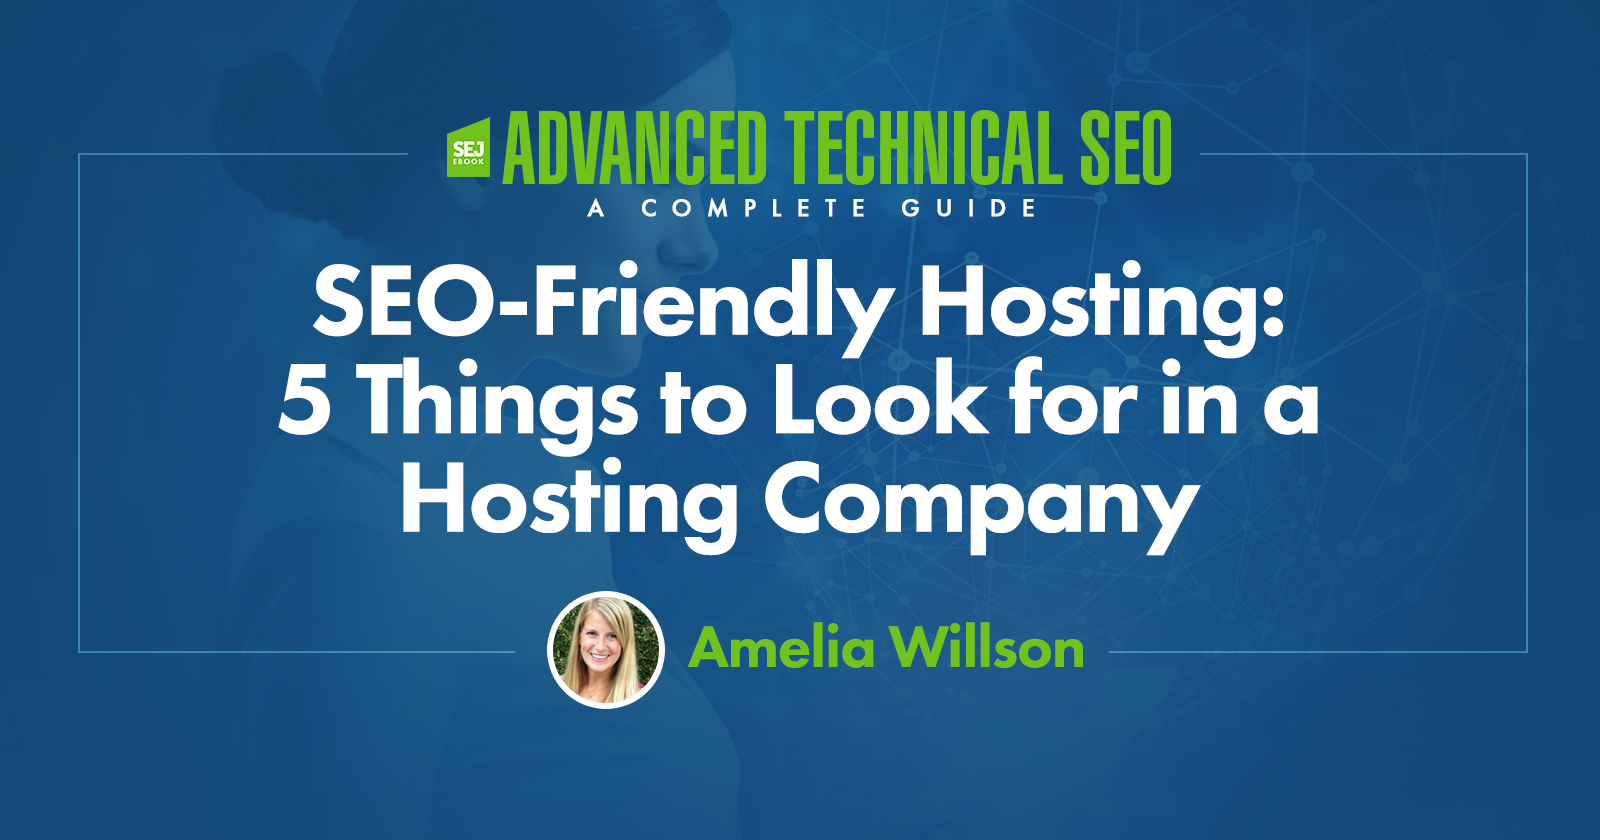 SEO-Friendly Hosting - 5 Things to Look for in a Hosting Company